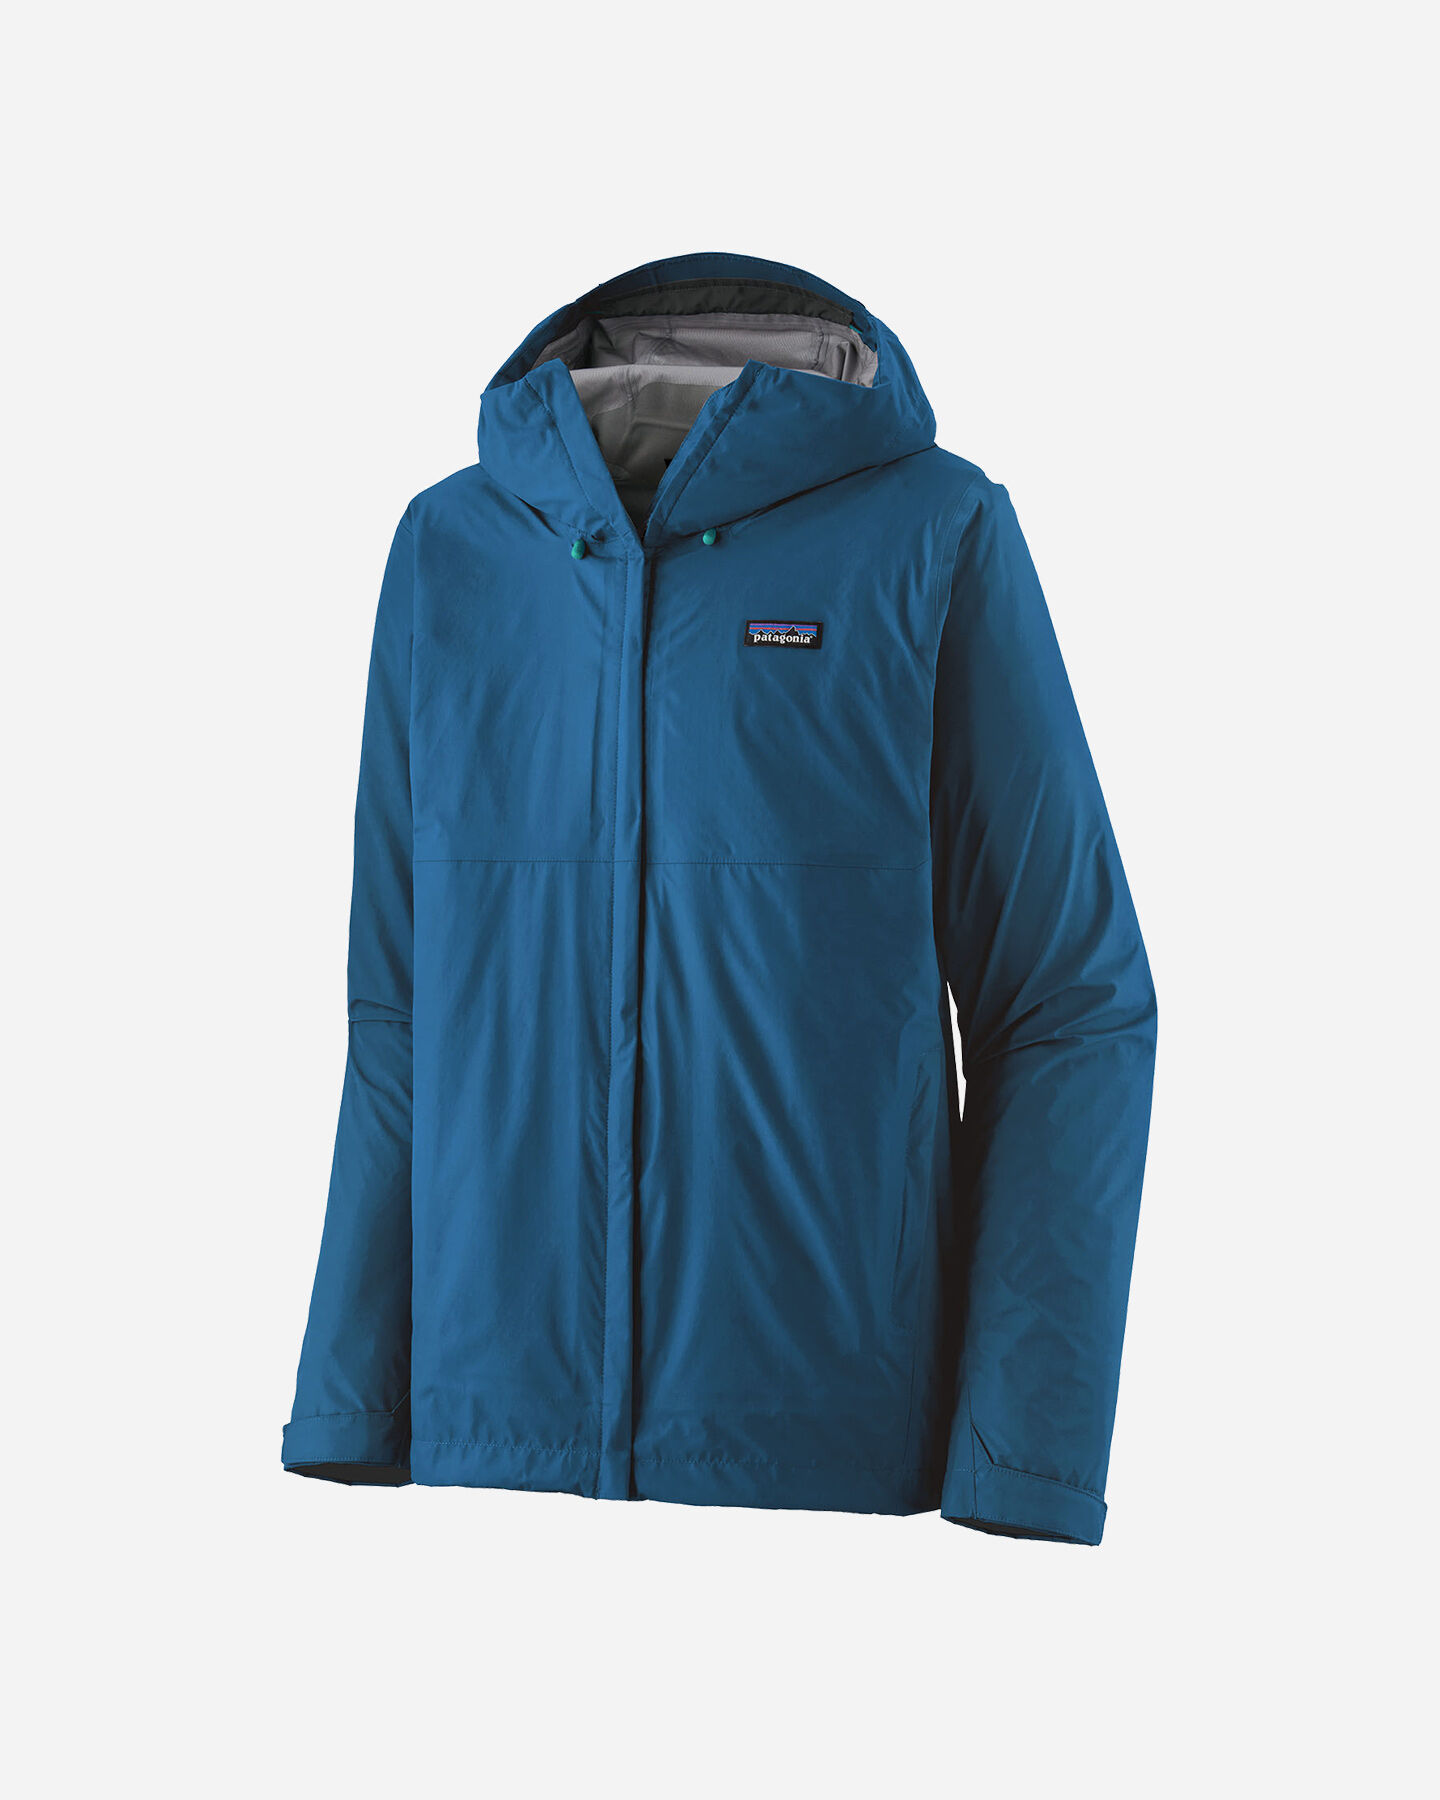  Giacca outdoor PATAGONIA TORRENTSHELL 3L M S5682391|ENLB|S scatto 0